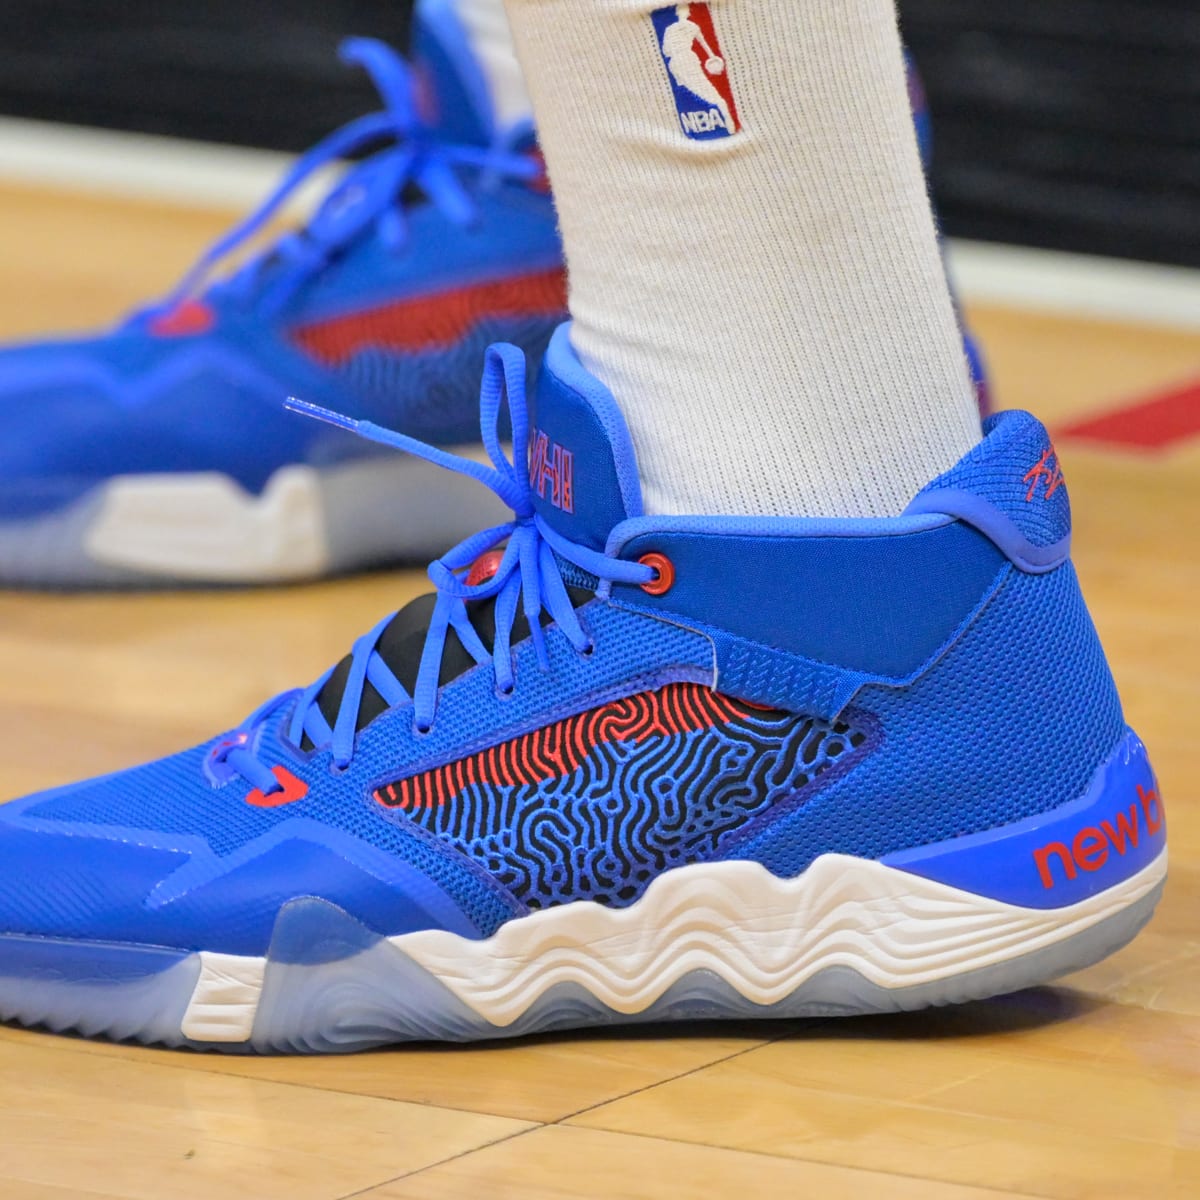 Clippers Sneaker Watch: The team's bench footwear is dazzling